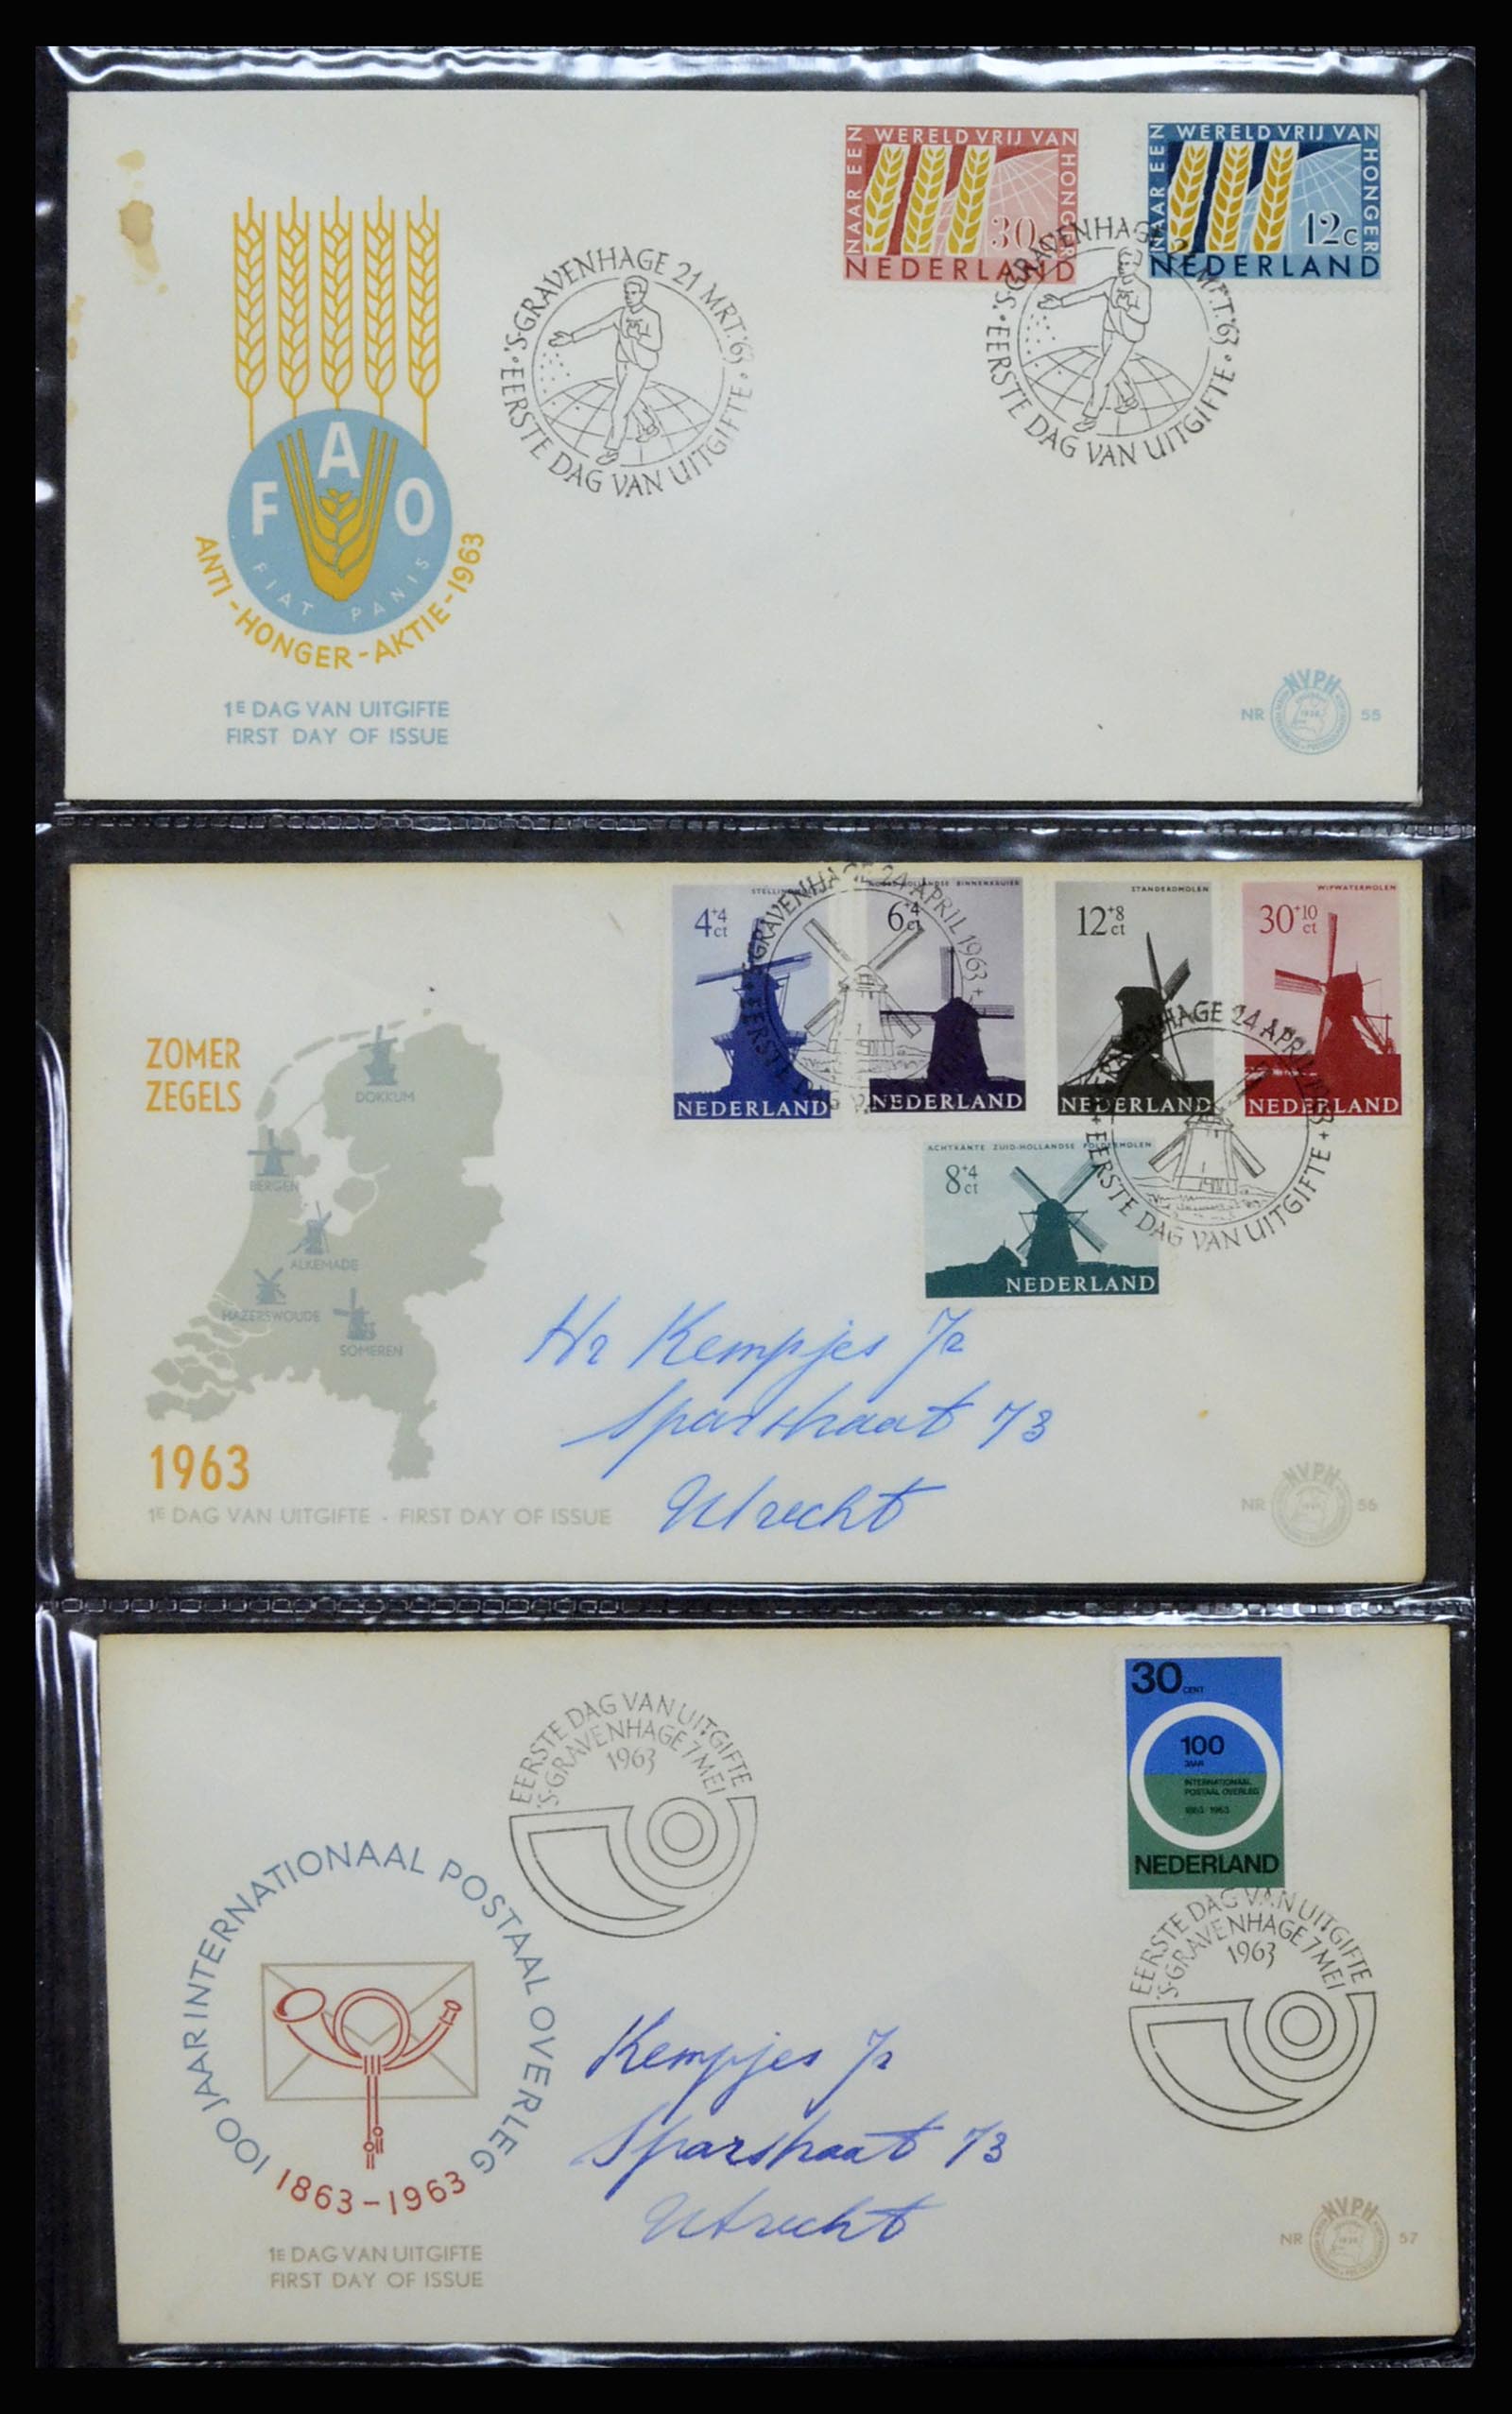 37197 020 - Stamp collection 37197 Netherlands FDC's 1950-2004.